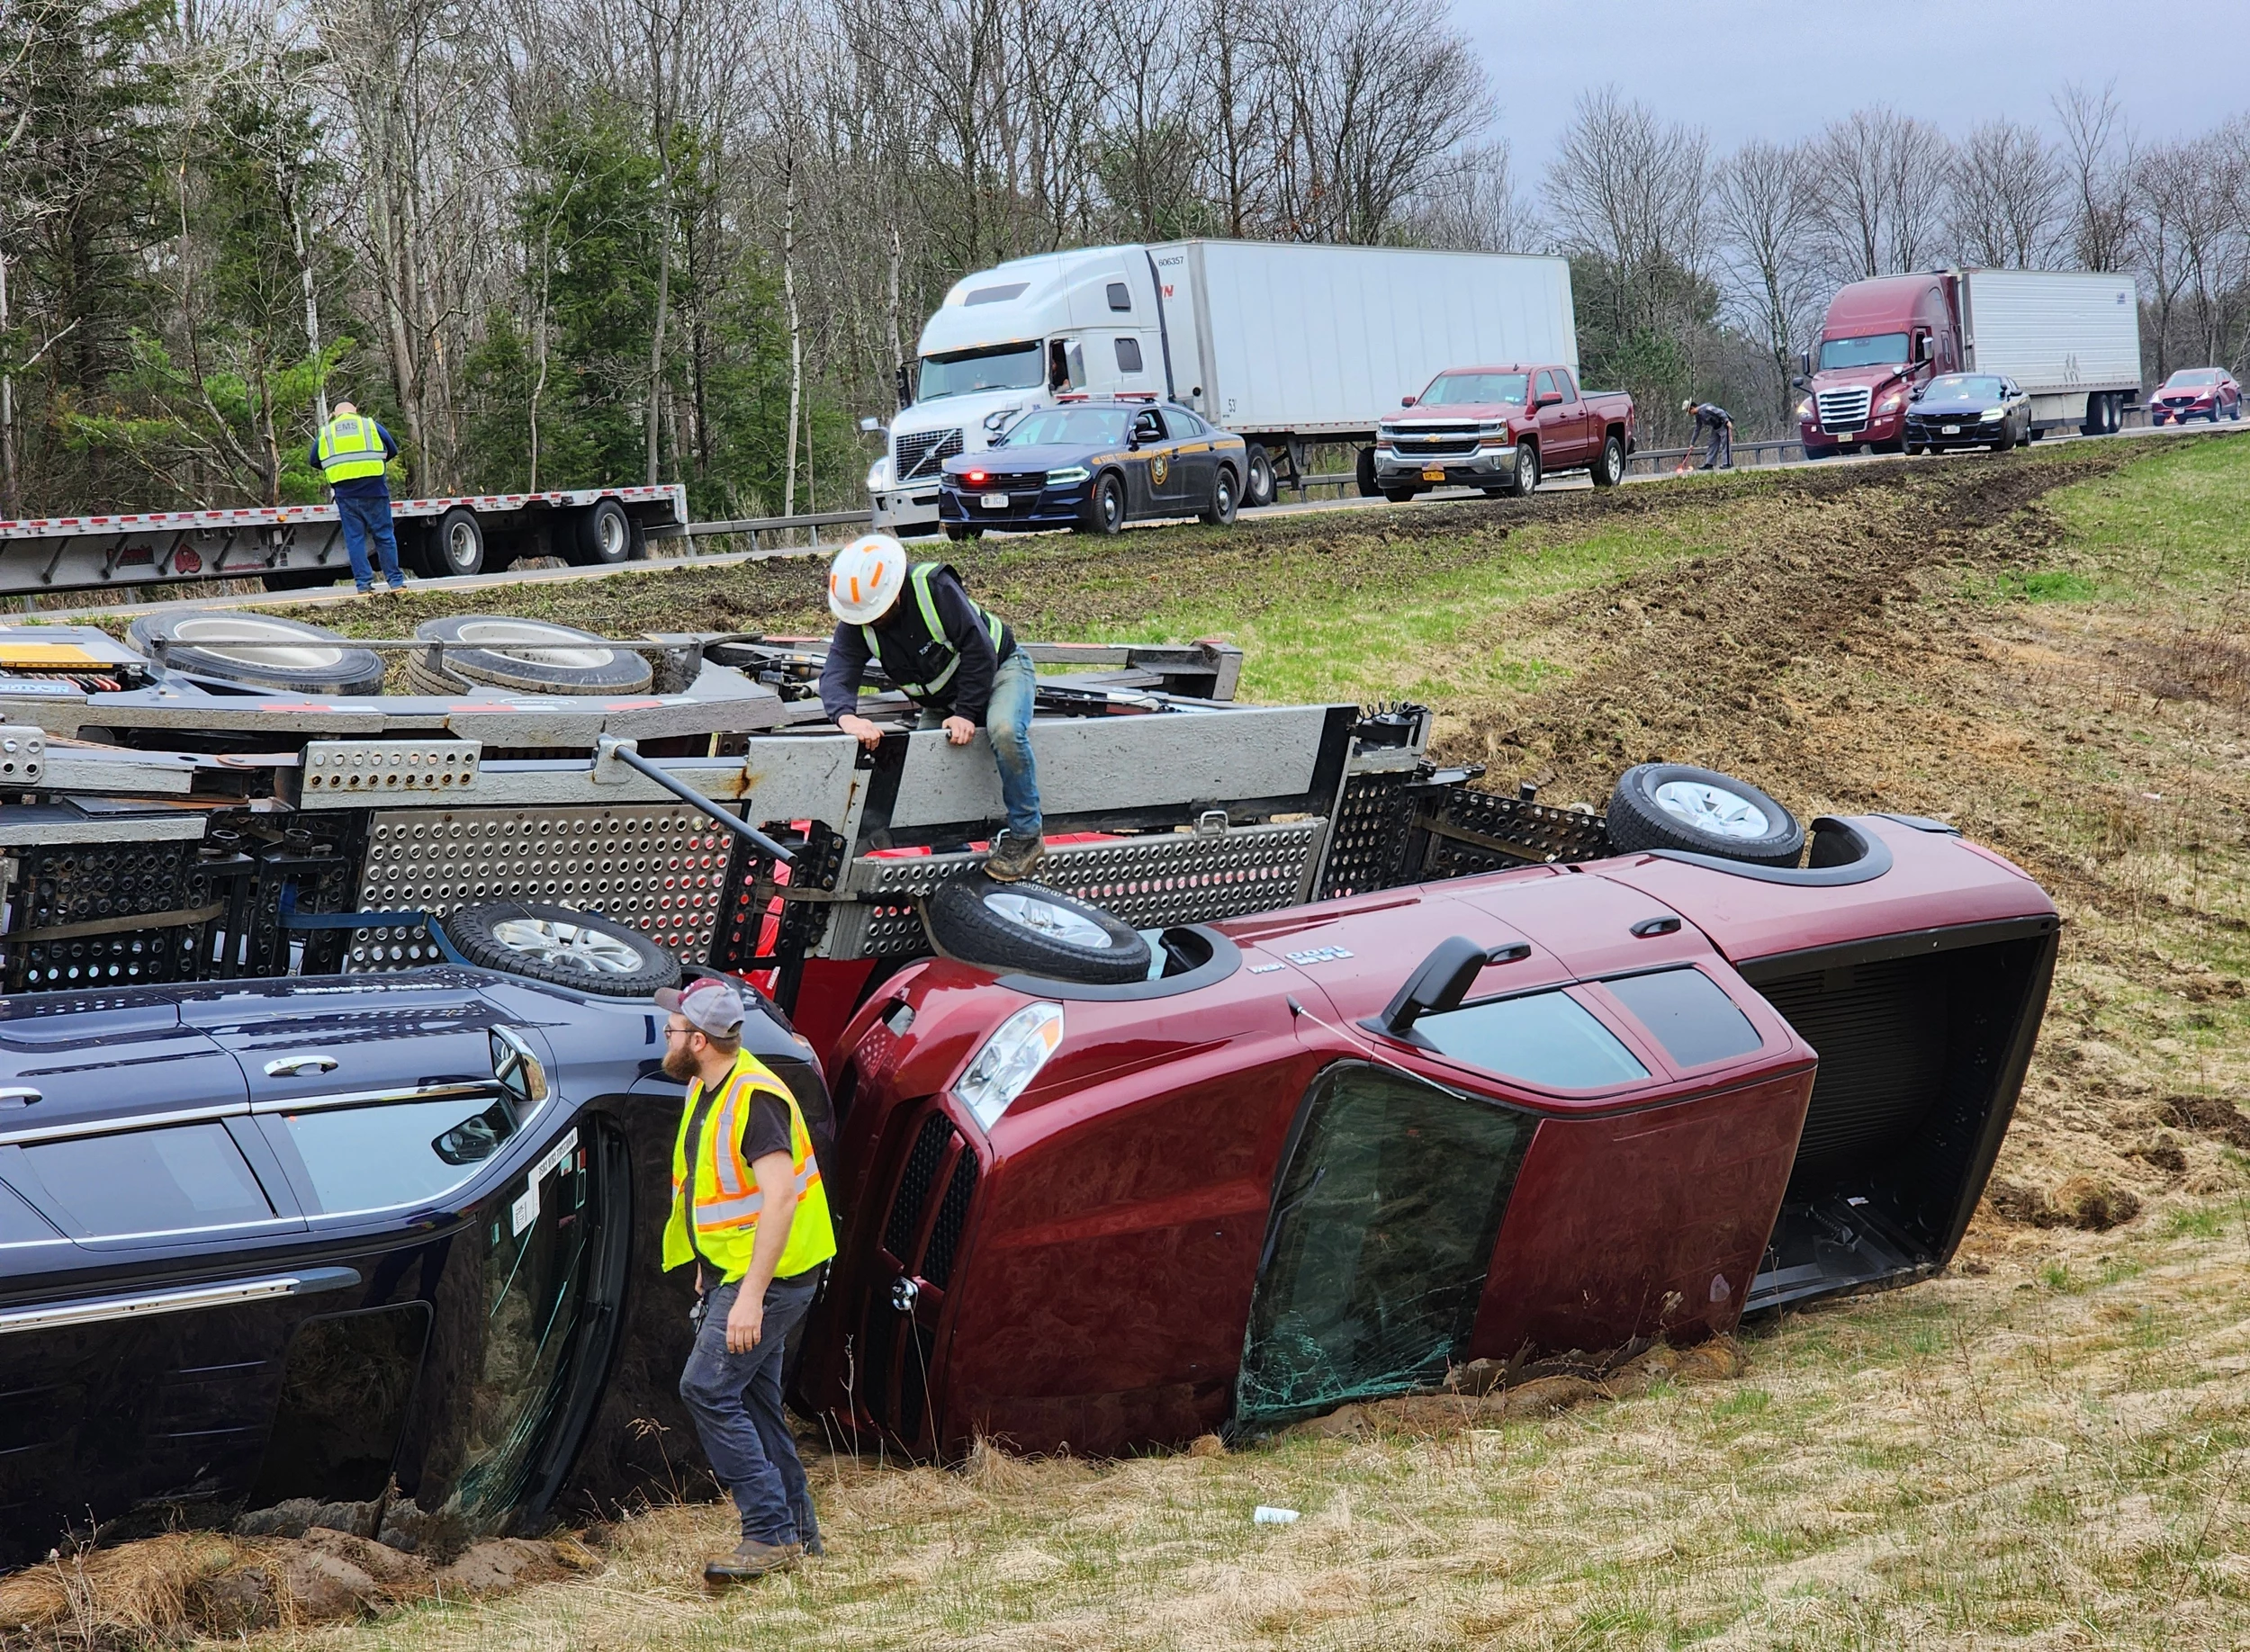 Workers from Als Garage examining vehicles that were damaged in a crash near Castle Creek. Photo: Bob Joseph/WNBF News